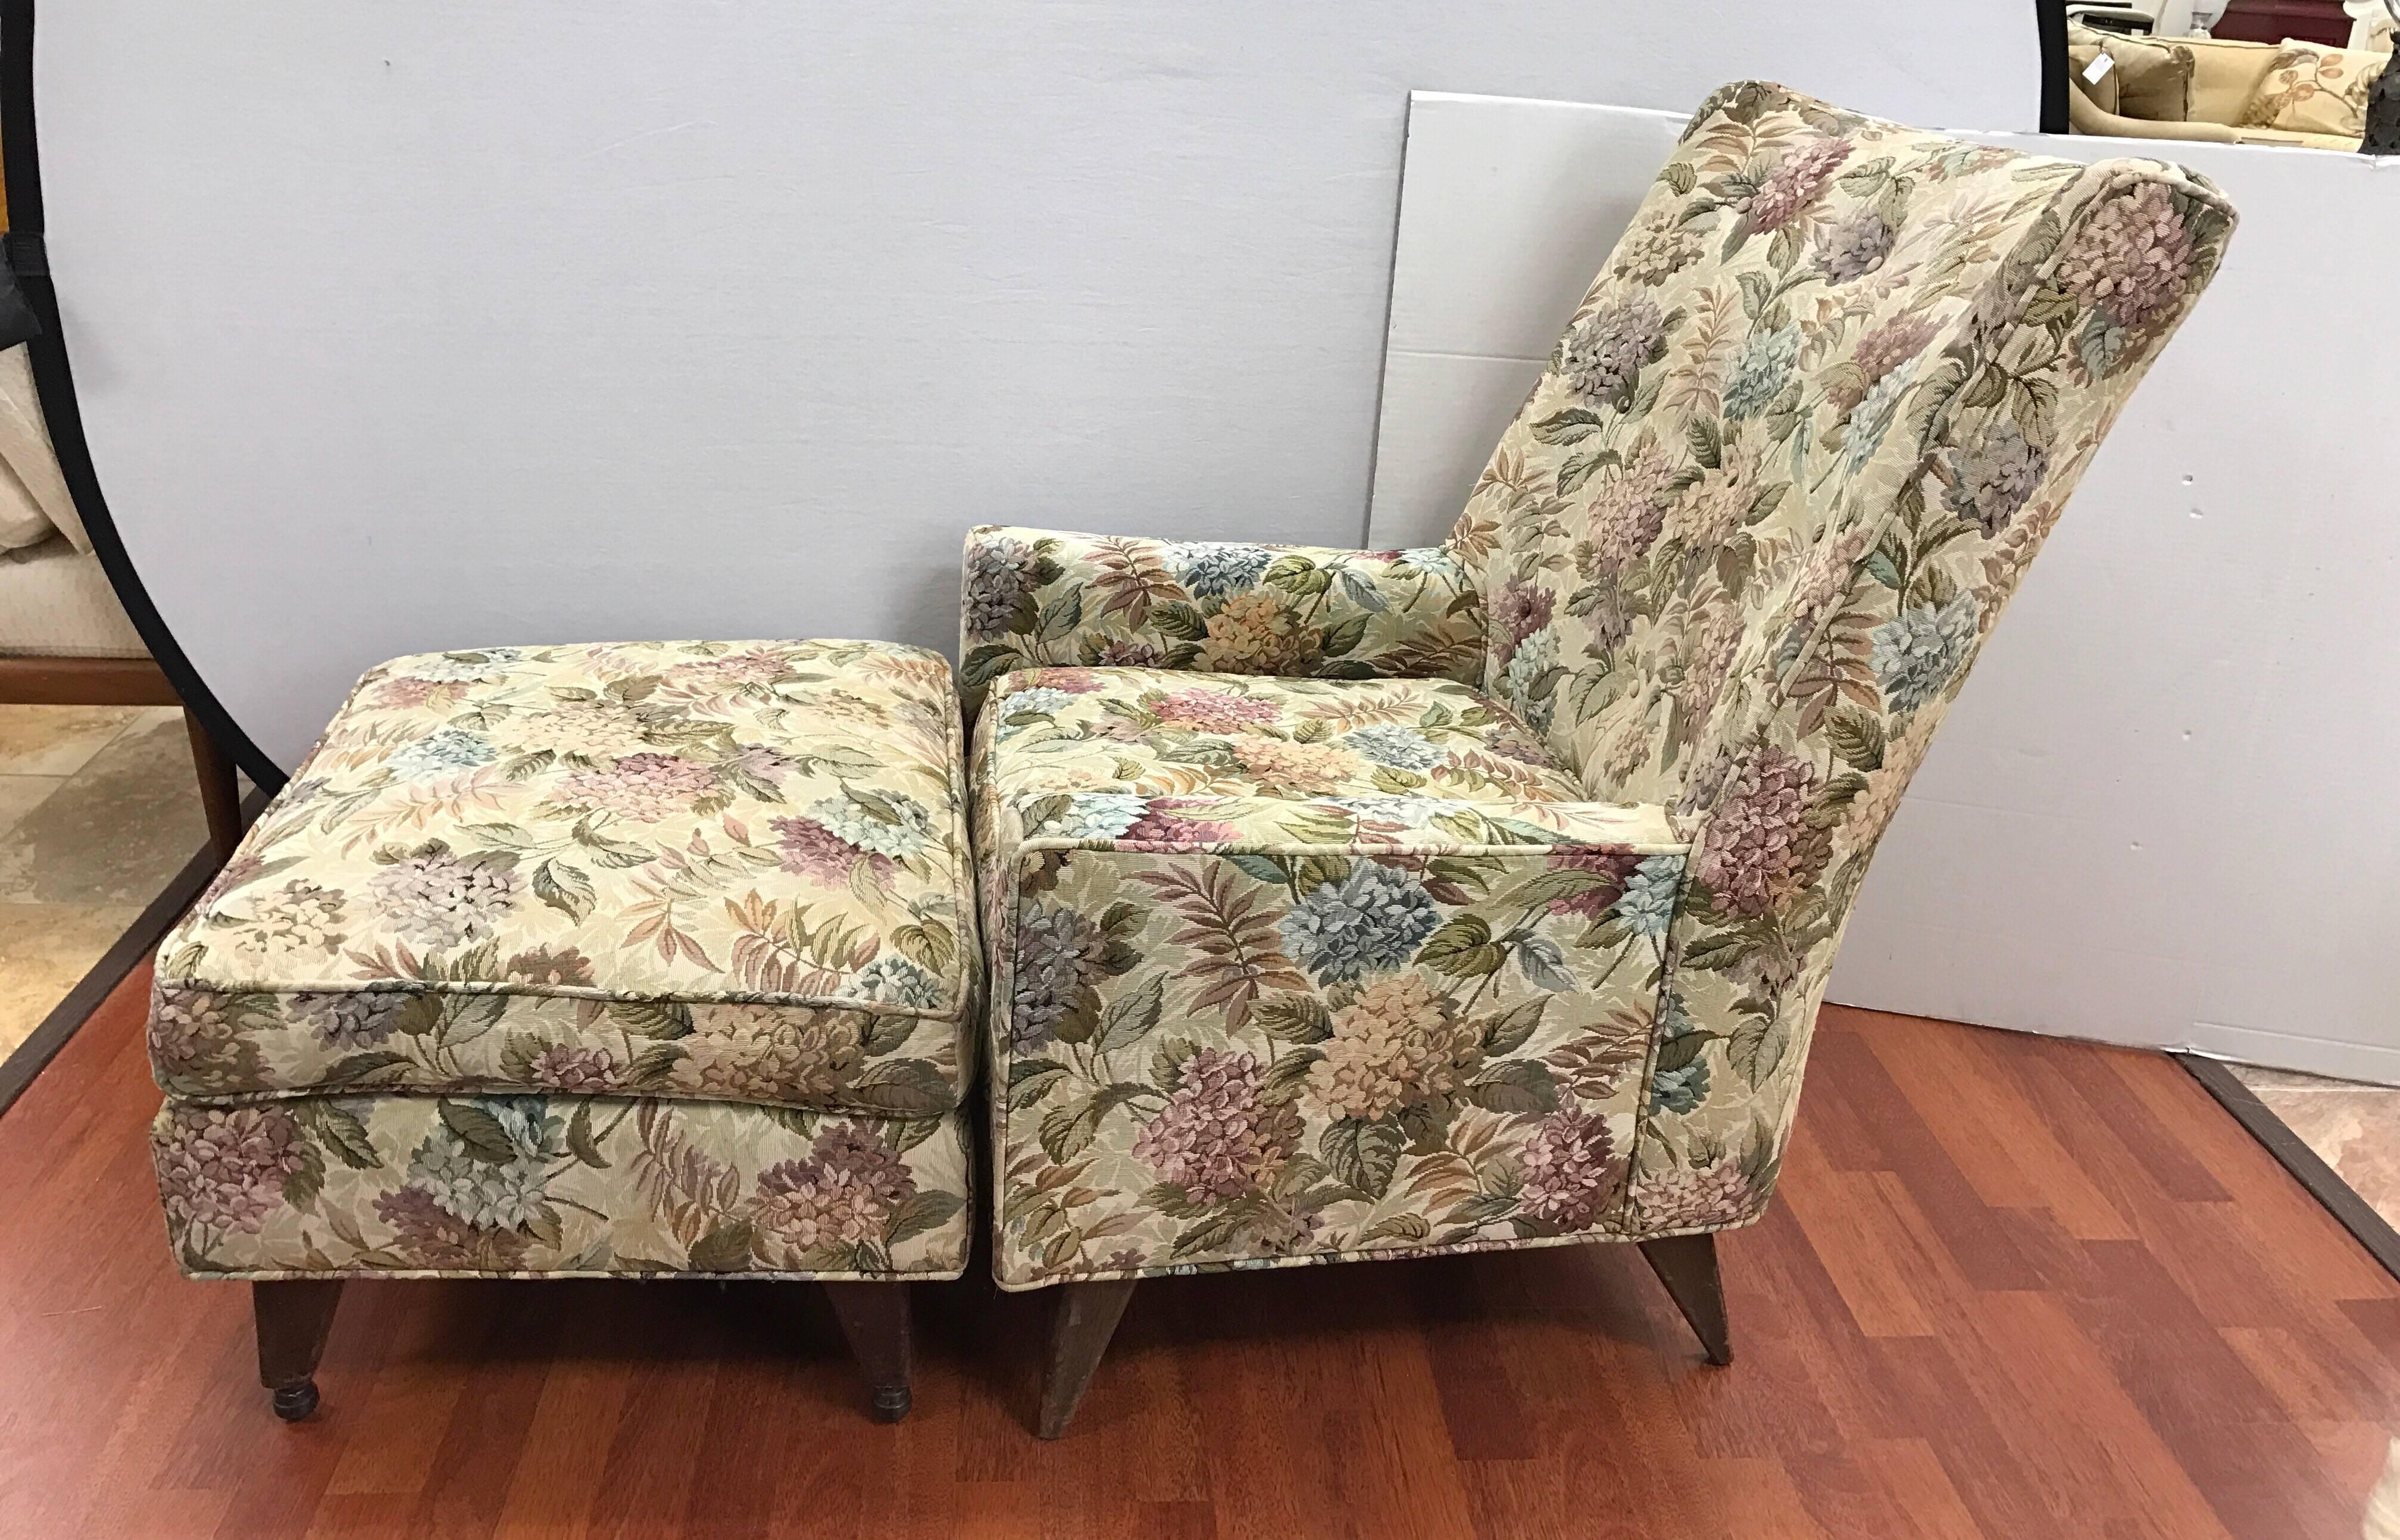 1960s upholstered lounge chair and ottoman that features casters for ease of movement. Original floral tapestry upholstery.